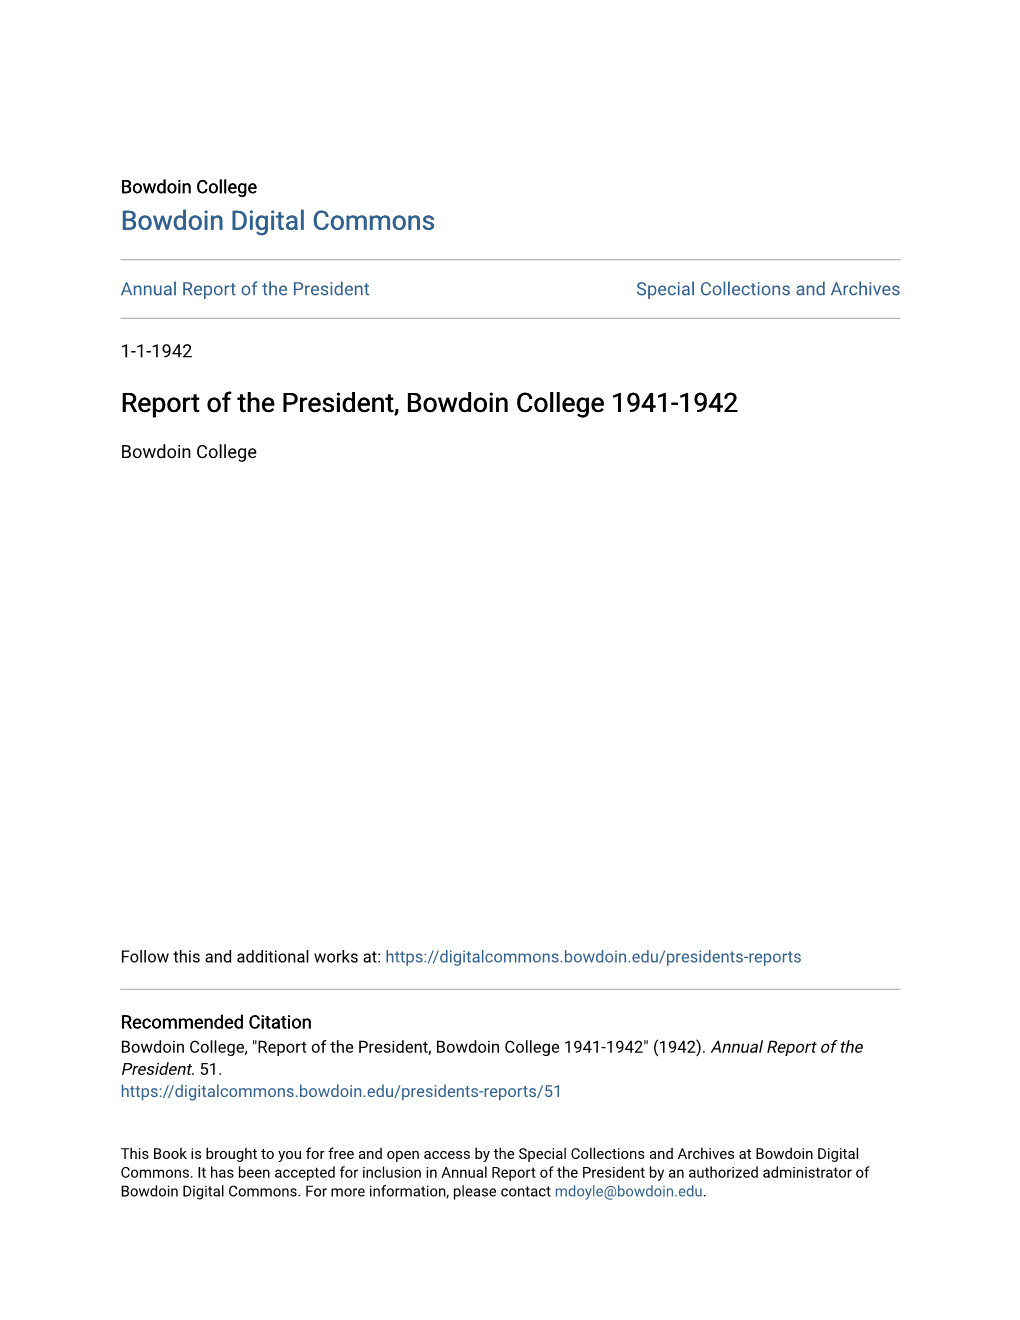 Report of the President, Bowdoin College 1941-1942